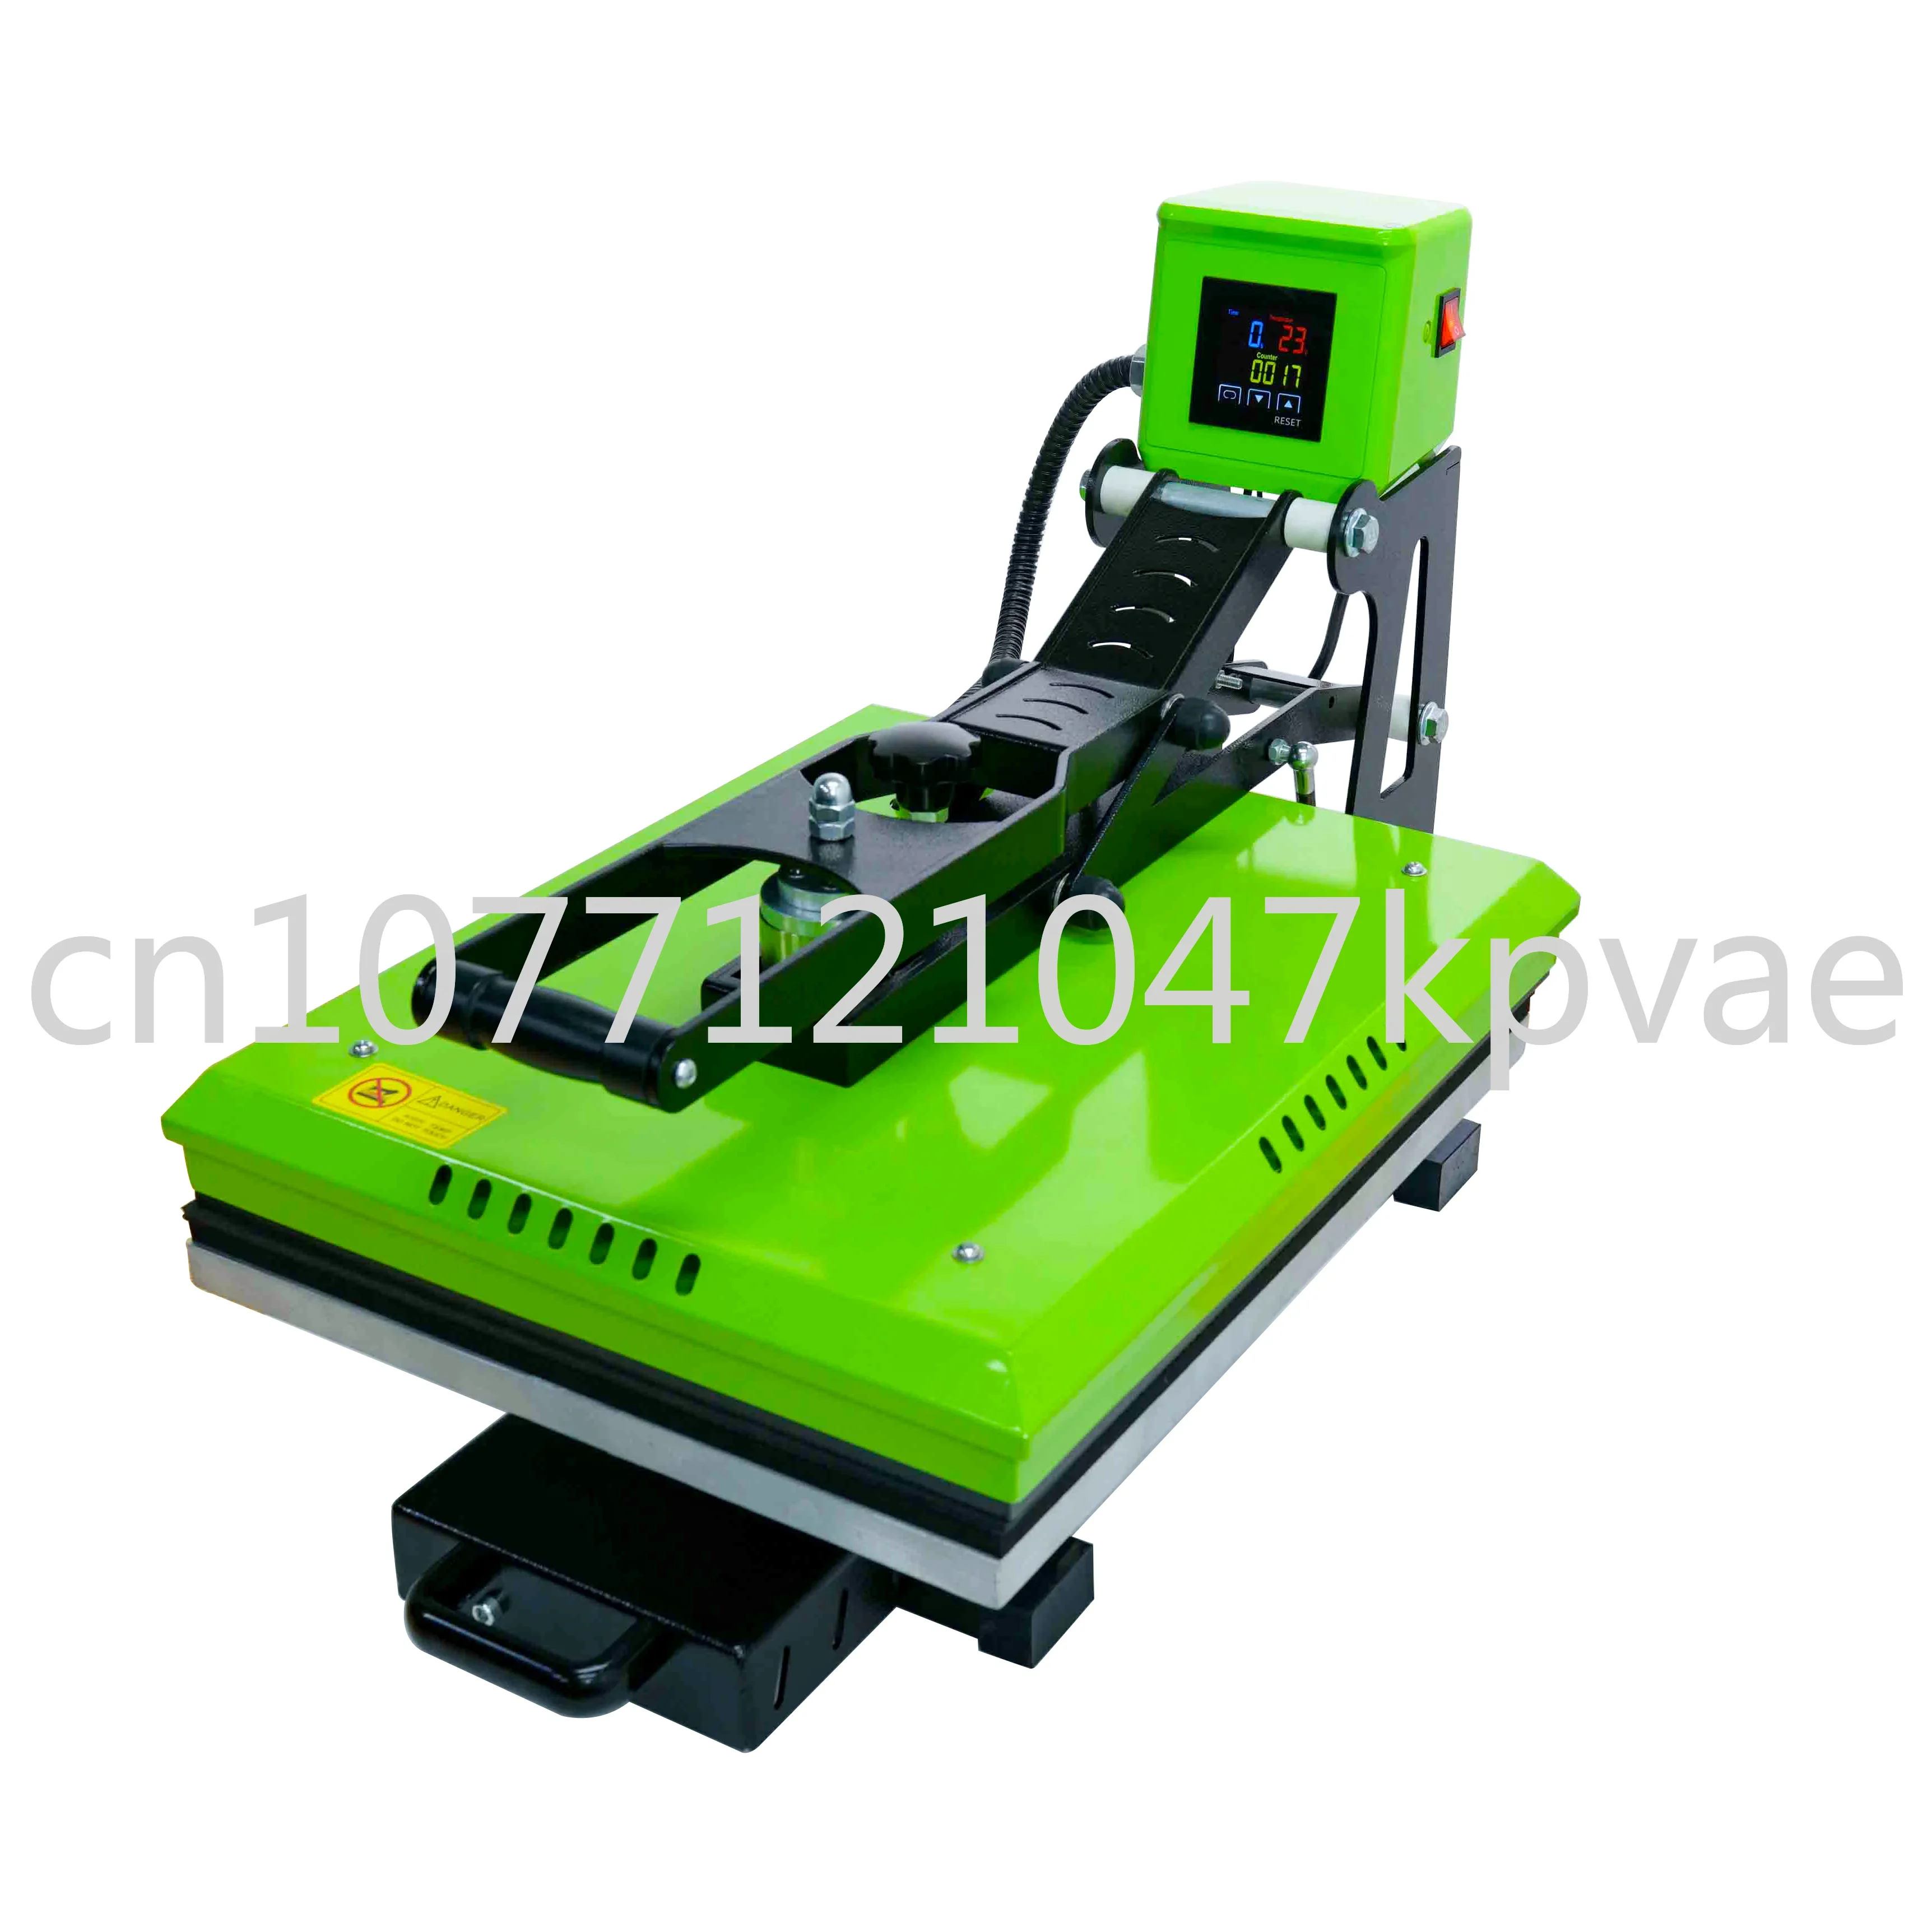 

CE FCC ROHS Approved 1702 Heavy Duty Auto Open Optional Working Table 16x20 sublimation t shirt heat press machine